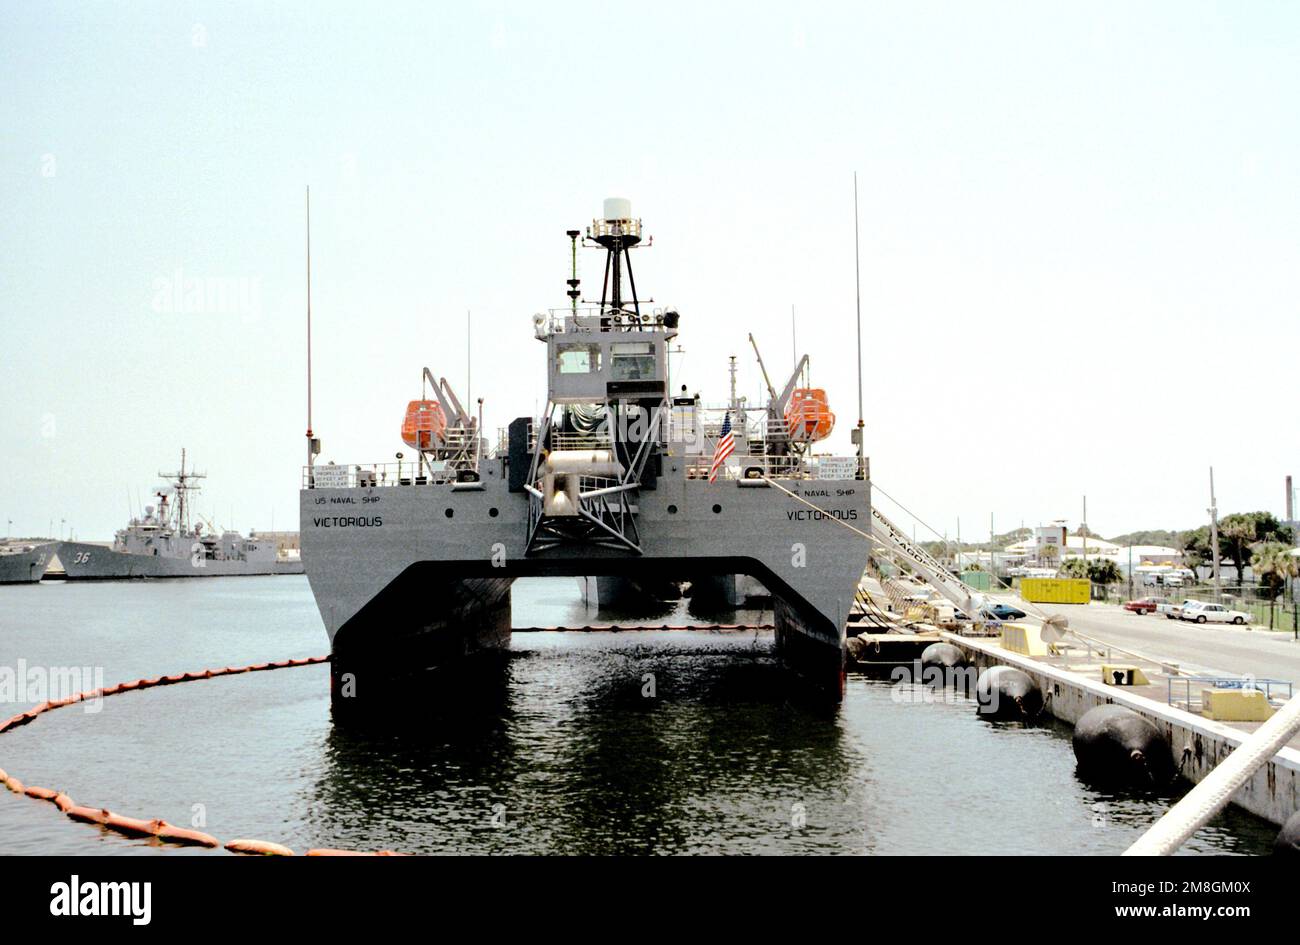 A stern view of the ocean surveillance ship USNS VICTORIOUS (T-AGOS-19) as it stands moored to a pier. Base: Naval Station, Mayport State: Florida(FL) Country: United States Of America (USA) Stock Photo